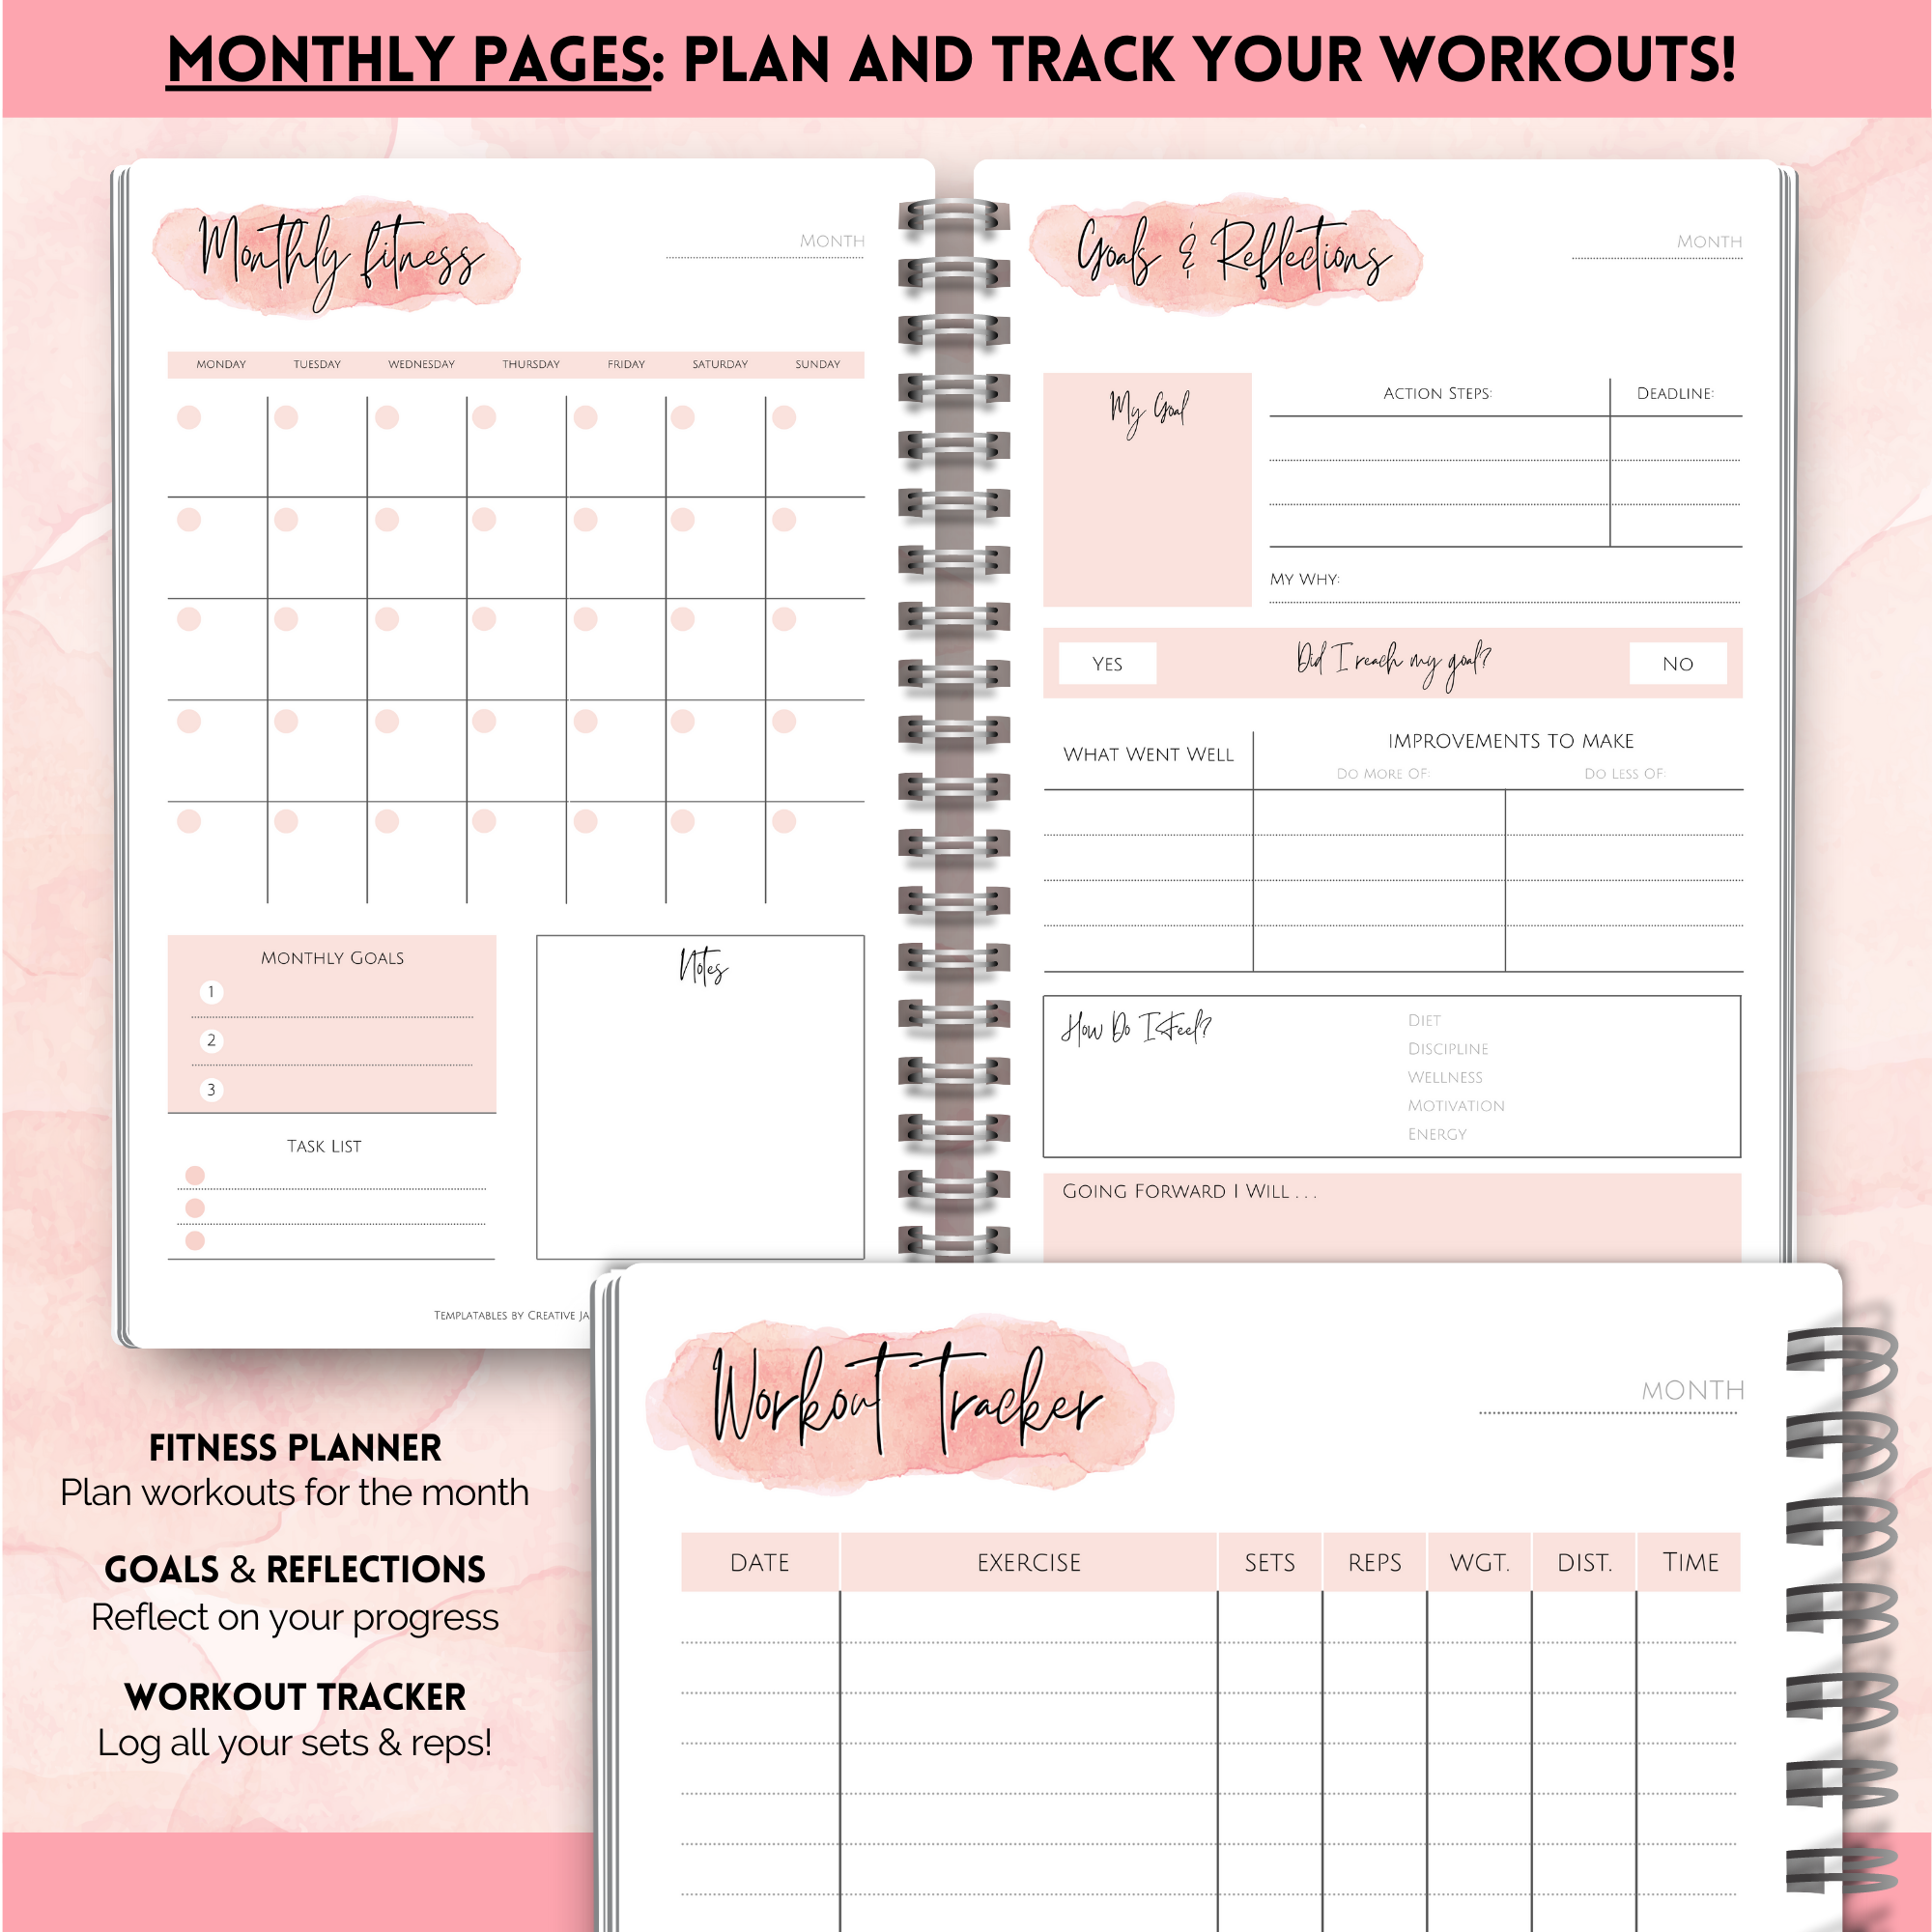 90 Days Planner Fitness Wellness Daily Agenda Exercise Weight Loss –  Lifestyle, Nutrition & Workout Journal - AliExpress